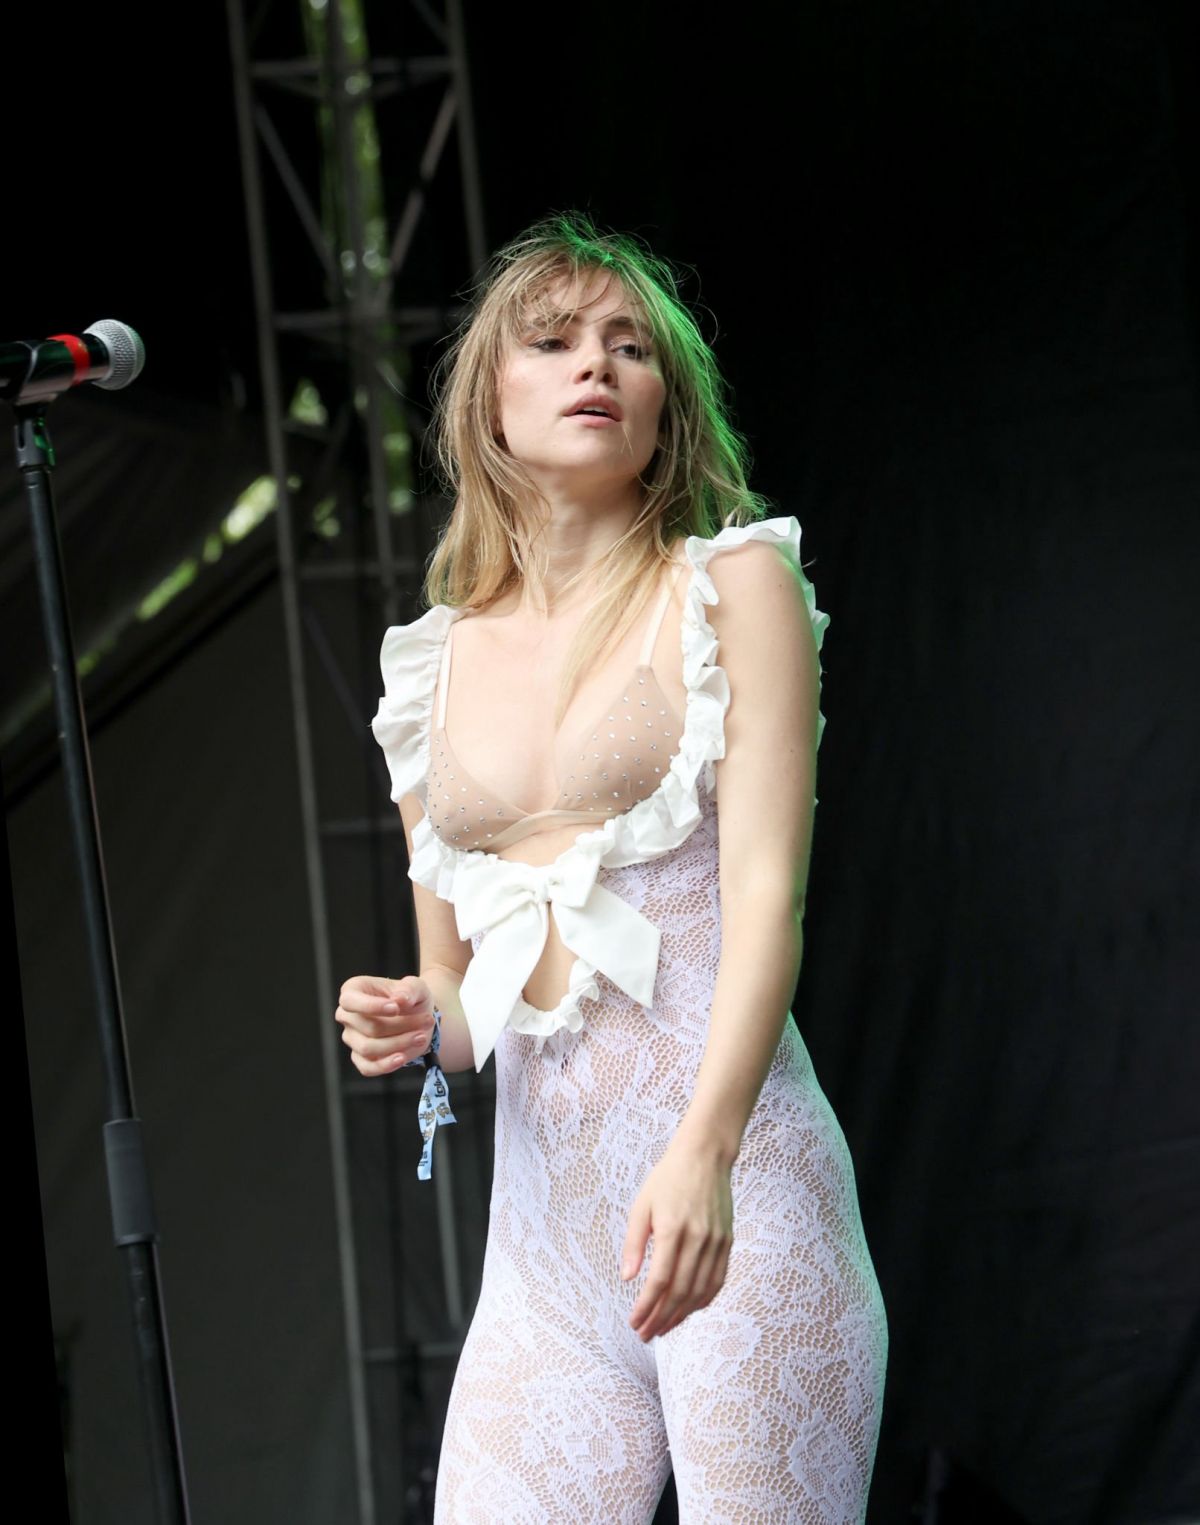 Suki Waterhouse Performs at Lollapalooza Festival in Chicago